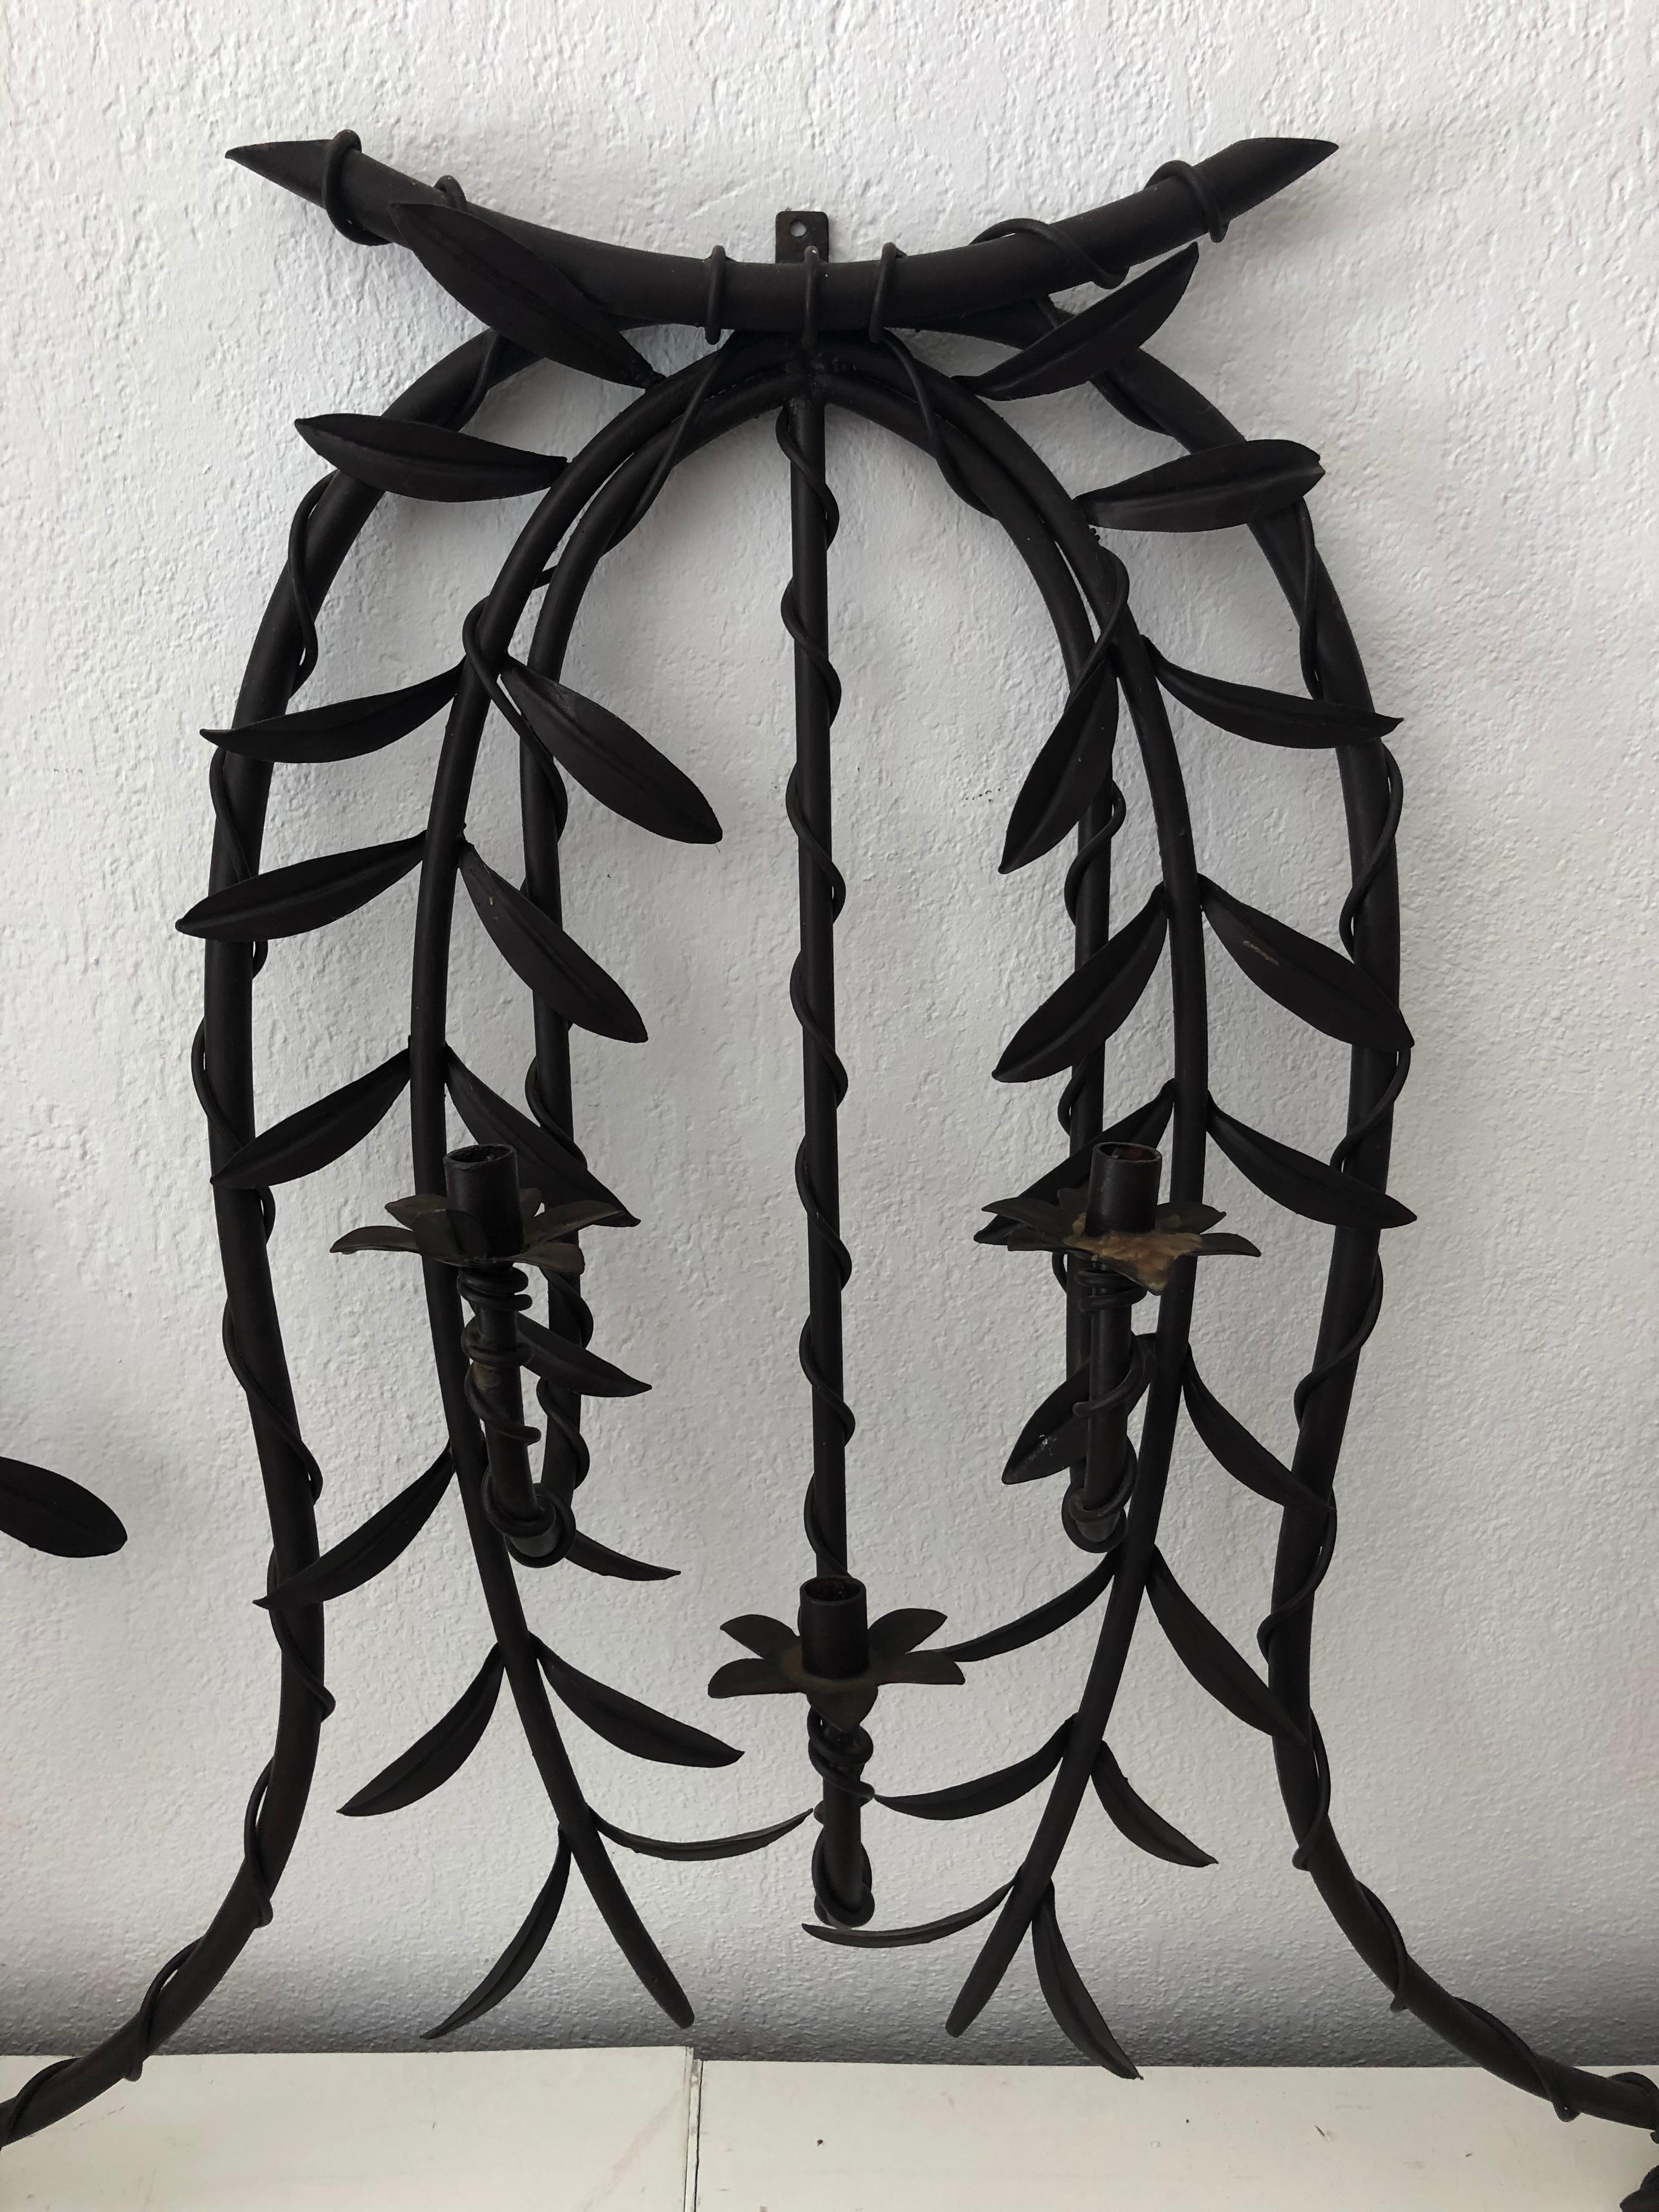 A majestic early 20th century wrought iron wall scone finely hand carved and featuring hanging leaves. The sconce holds 7 candles. It is currently not electrified/wired, can be done upon request

Dimensions: 70